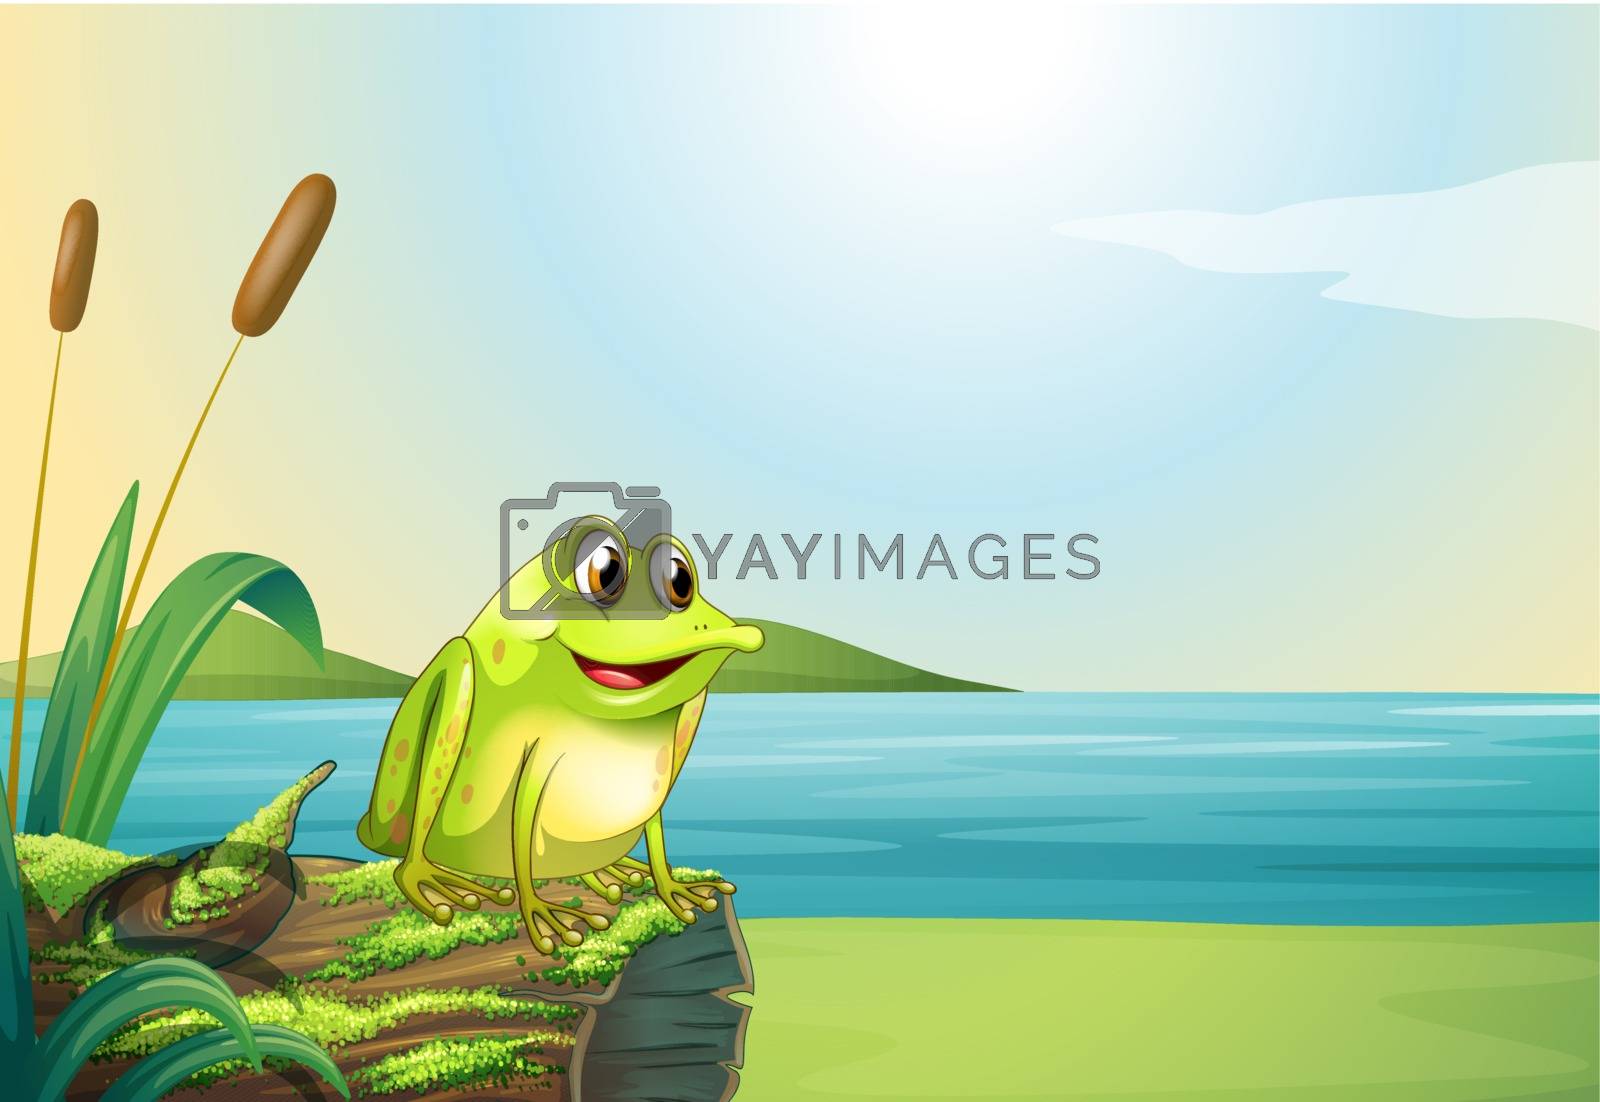 Royalty free image of A frog above a trunk at the riverbank by iimages